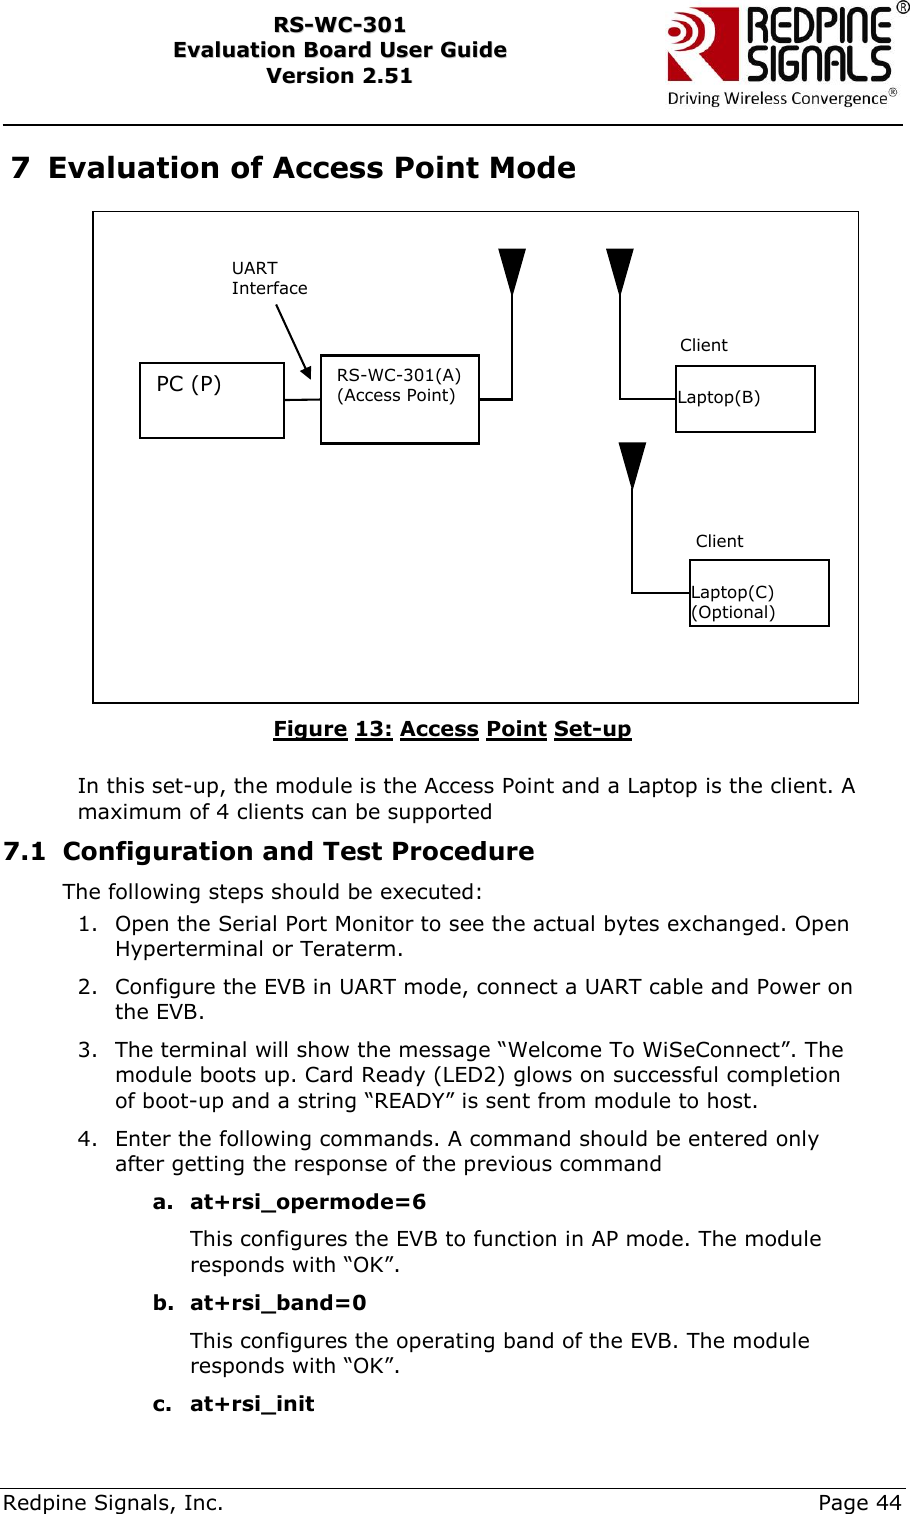     Redpine Signals, Inc.     Page 44 RRSS--WWCC--330011    EEvvaalluuaattiioonn  BBooaarrdd  UUsseerr  GGuuiiddee  VVeerrssiioonn  22..5511    7 Evaluation of Access Point Mode  Figure 13: Access Point Set-up  In this set-up, the module is the Access Point and a Laptop is the client. A maximum of 4 clients can be supported 7.1 Configuration and Test Procedure  The following steps should be executed: 1. Open the Serial Port Monitor to see the actual bytes exchanged. Open Hyperterminal or Teraterm.  2. Configure the EVB in UART mode, connect a UART cable and Power on the EVB. 3. The terminal will show the message “Welcome To WiSeConnect”. The module boots up. Card Ready (LED2) glows on successful completion of boot-up and a string “READY” is sent from module to host.  4. Enter the following commands. A command should be entered only after getting the response of the previous command a. at+rsi_opermode=6 This configures the EVB to function in AP mode. The module responds with “OK”. b. at+rsi_band=0 This configures the operating band of the EVB. The module responds with “OK”. c. at+rsi_init PC (P) RS-WC-301(A) (Access Point)  Laptop(B) UART Interface Client  Laptop(C) (Optional)  Client 